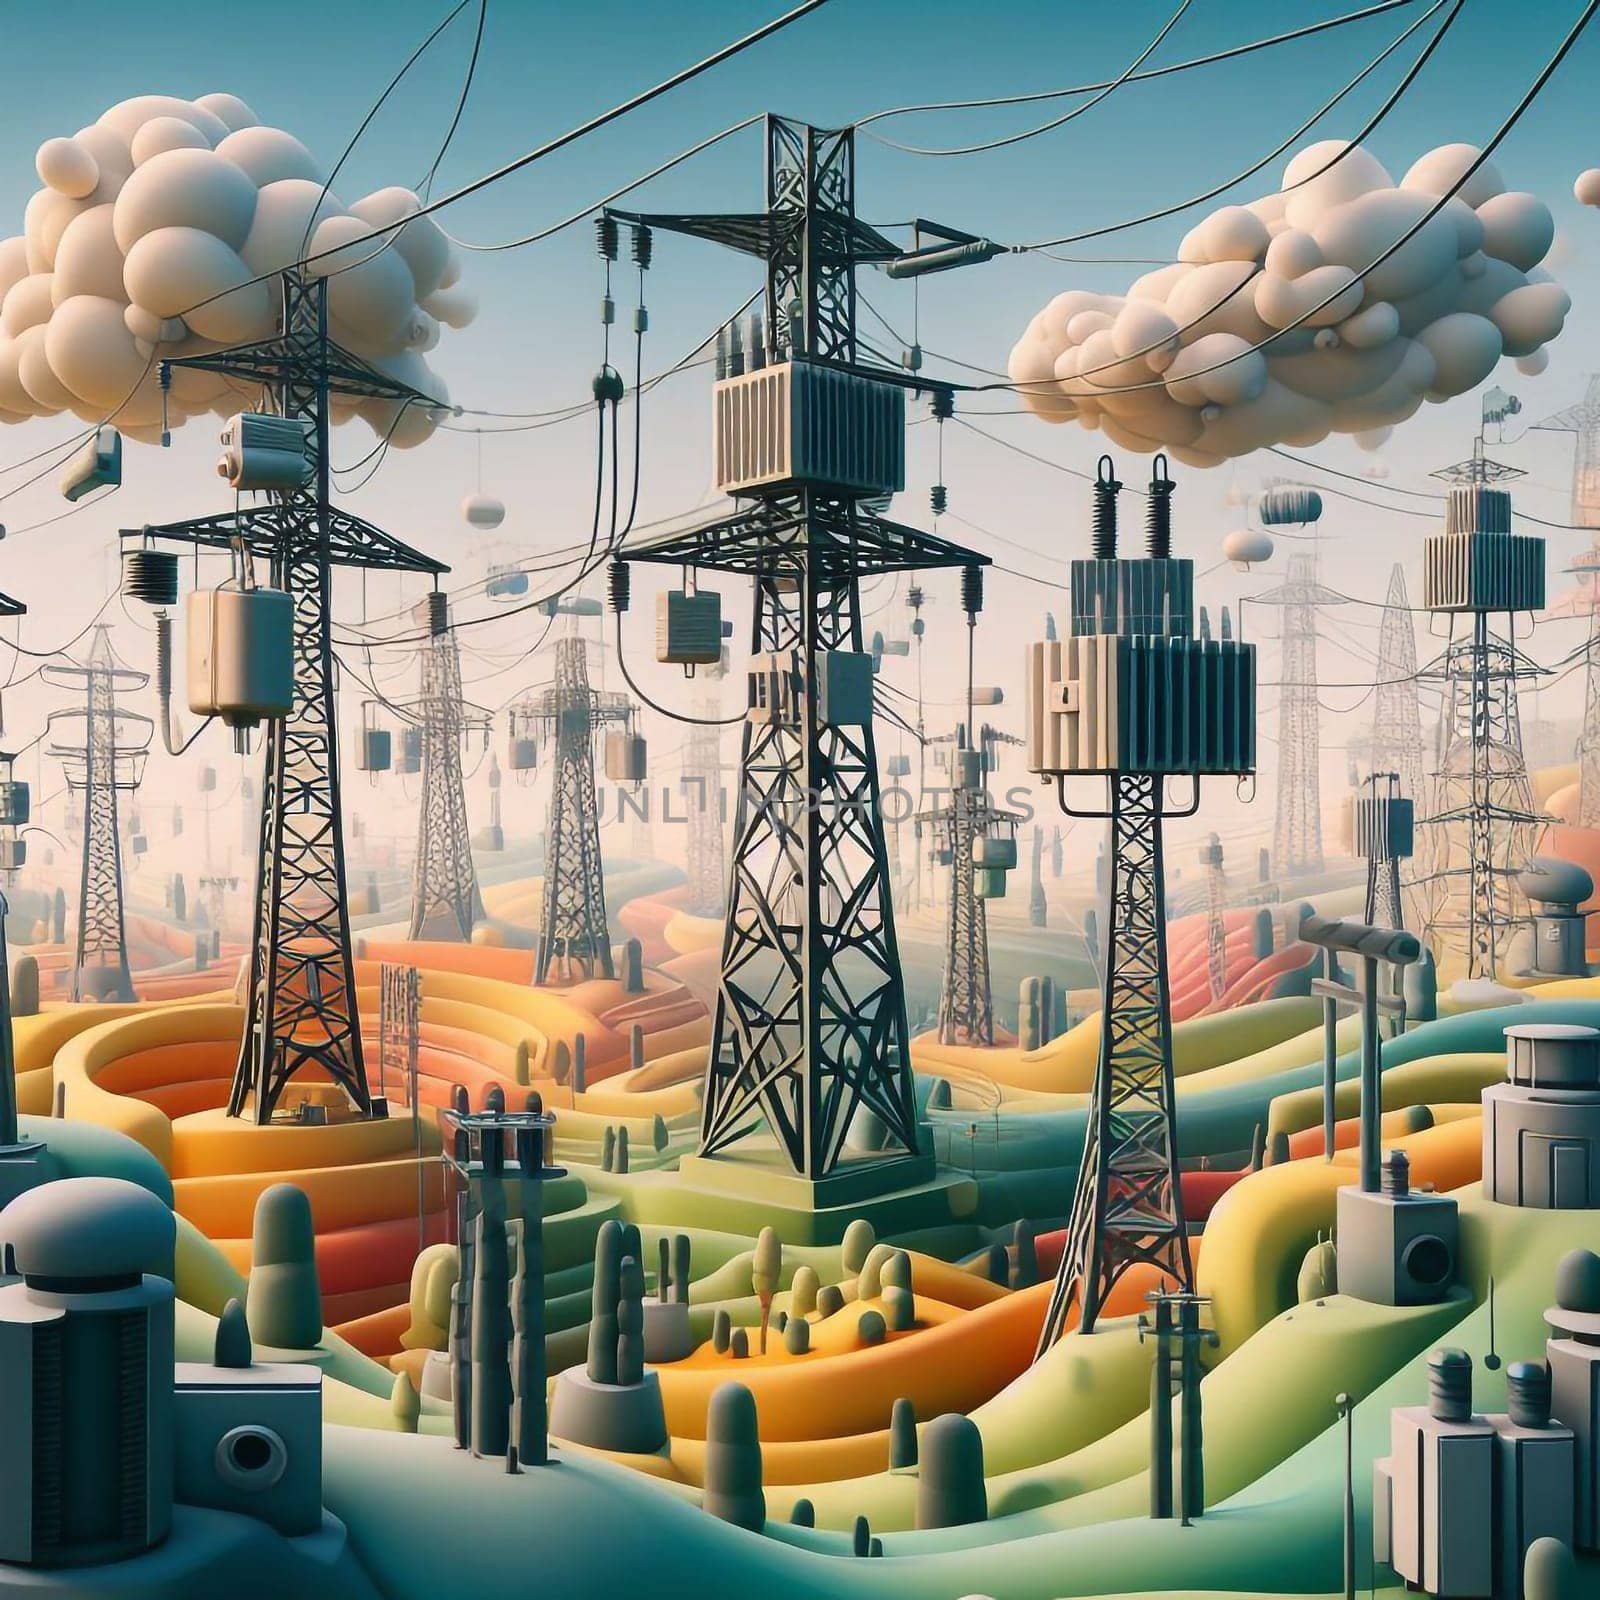 Power lines for energy supply by architectphd